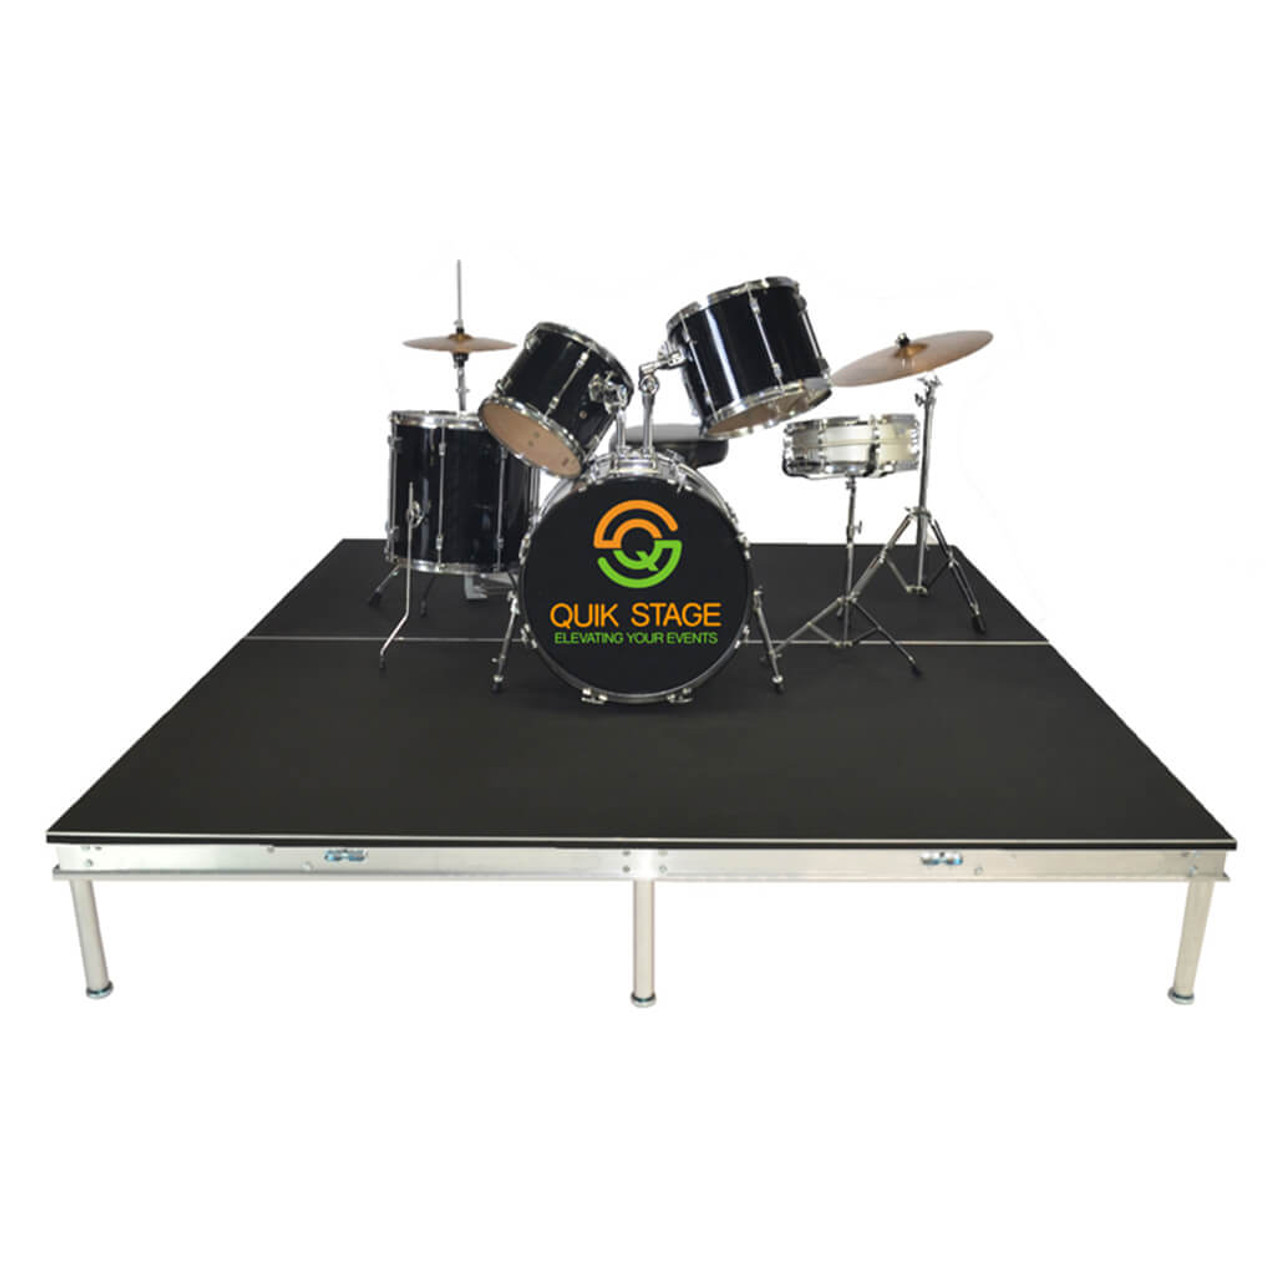 Quik Stage 8' x 32' High Portable Stage Package with Black Polyvinyl Non-Skid Surface. Additional Heights and Surfaces Available - Drum Riser without skirting